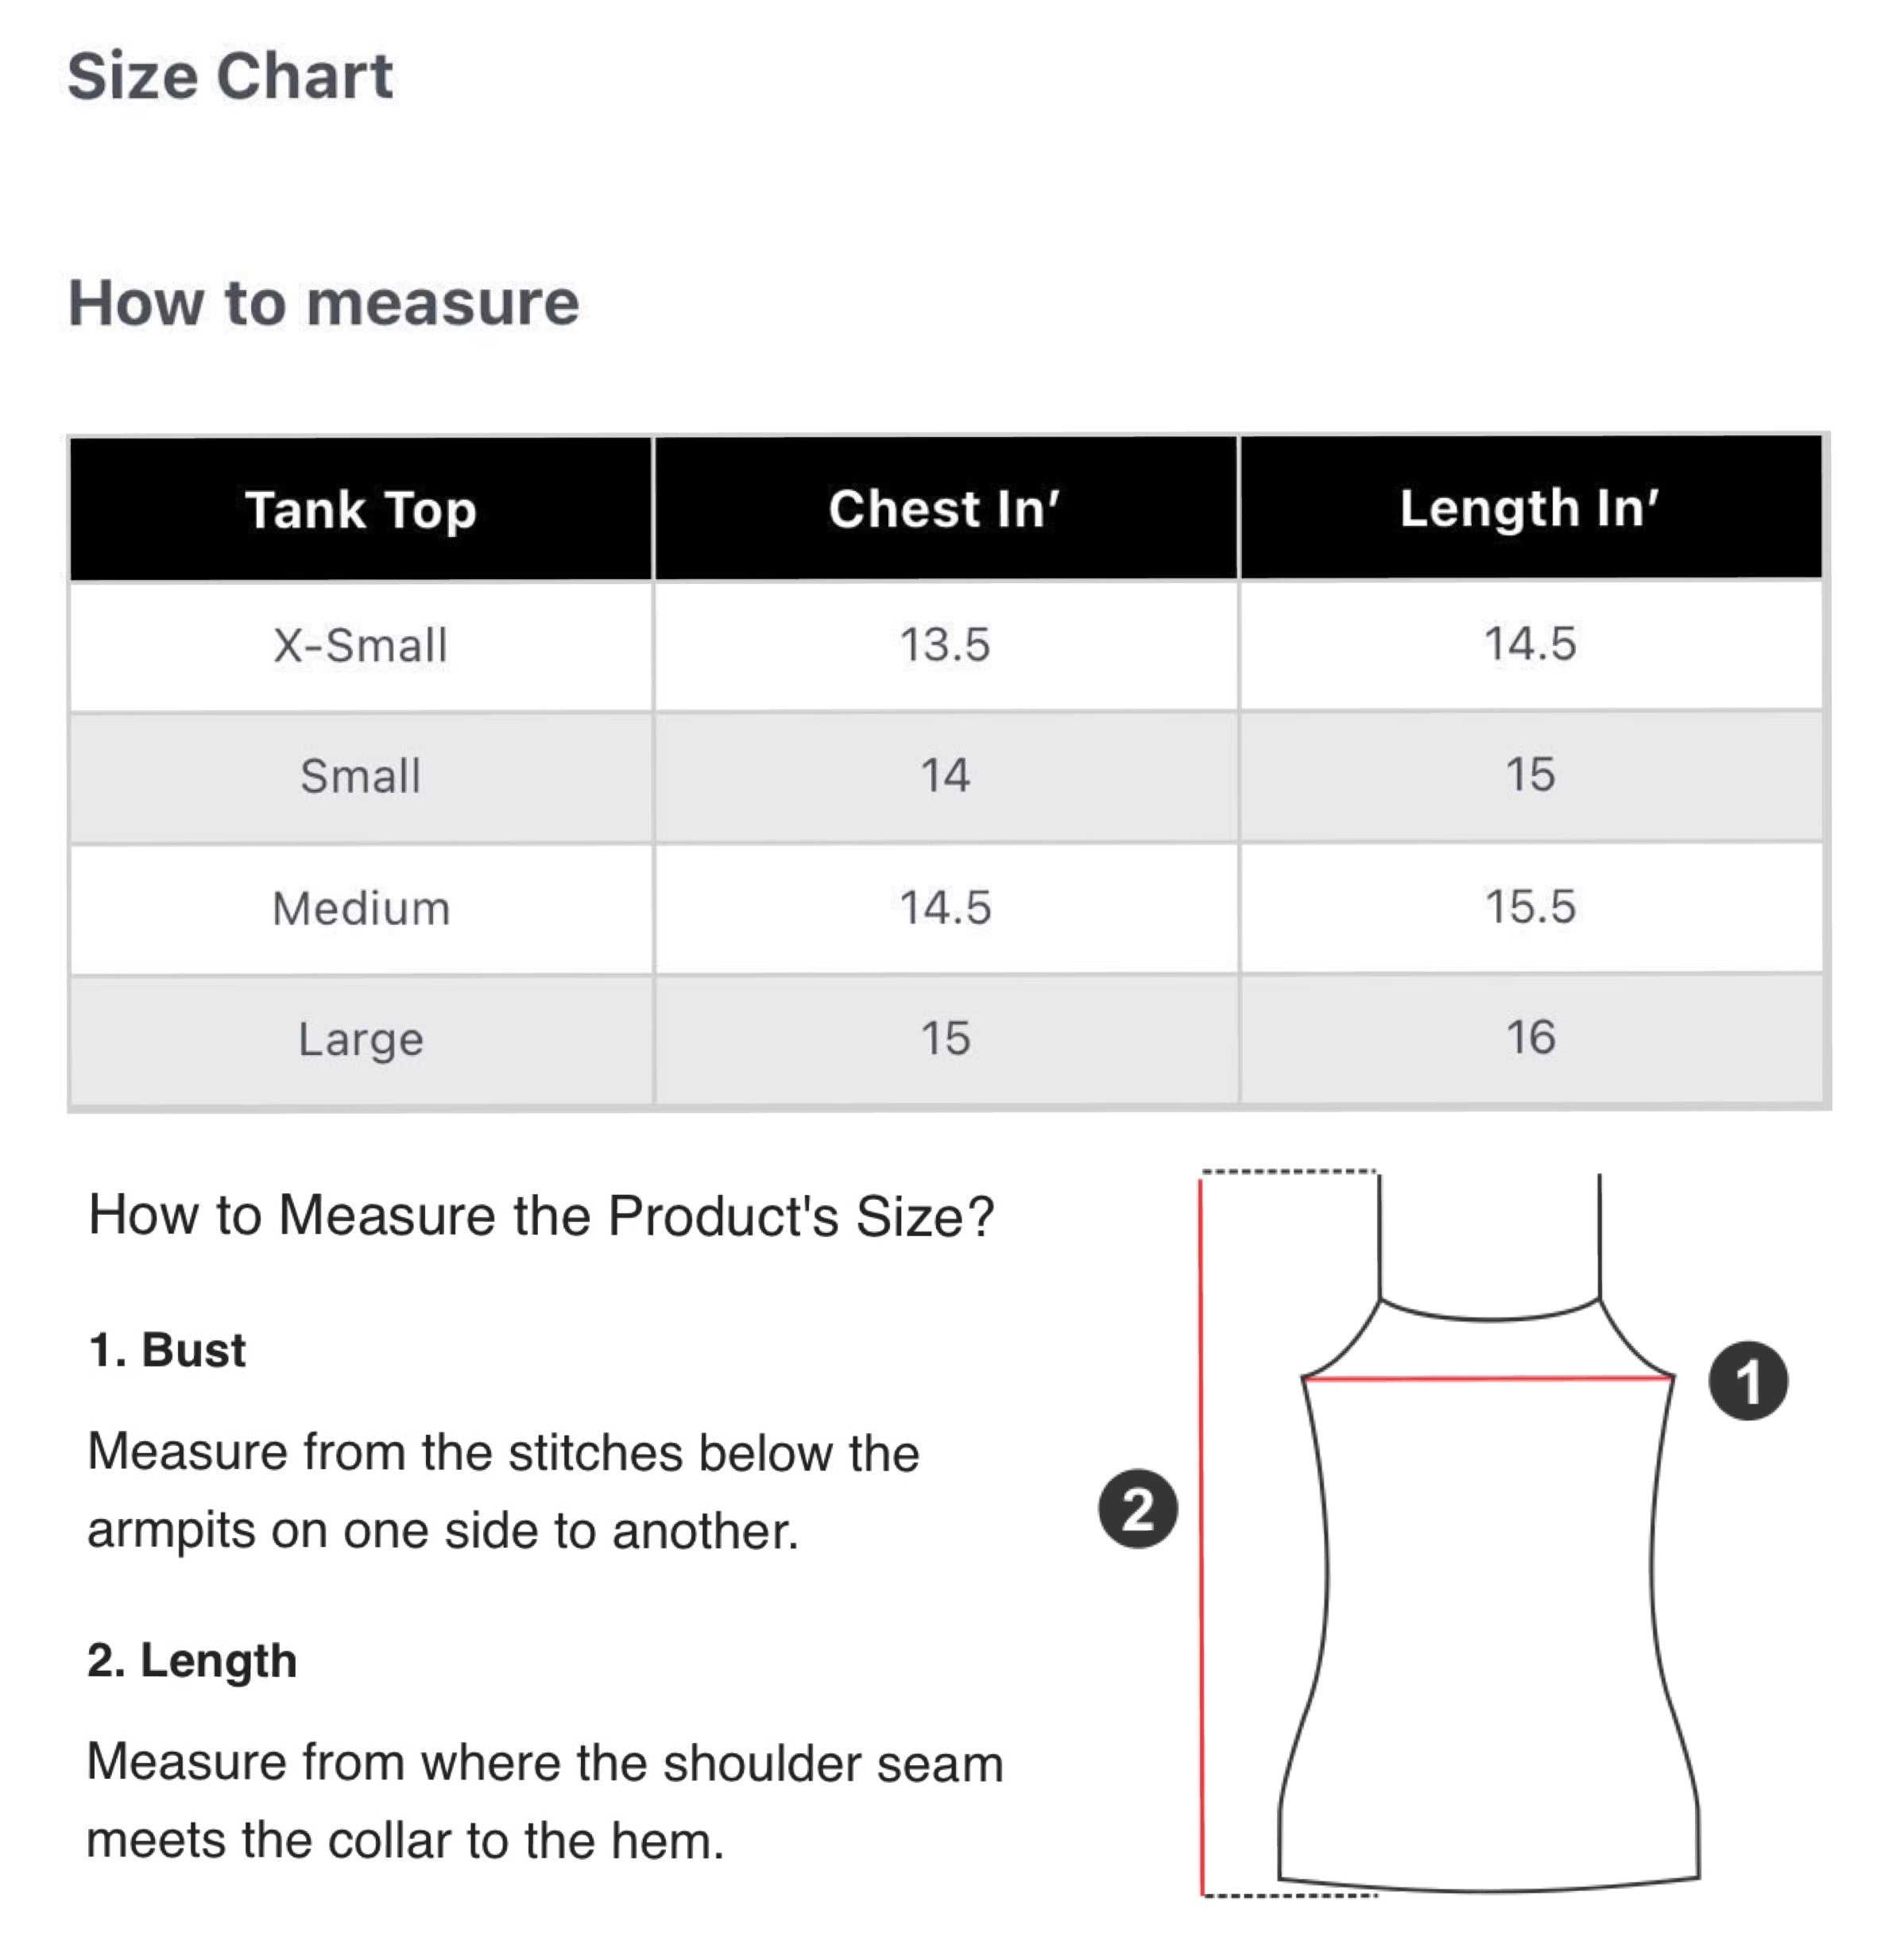 Teen Solid Two Tones Rib Fitted Tank Top